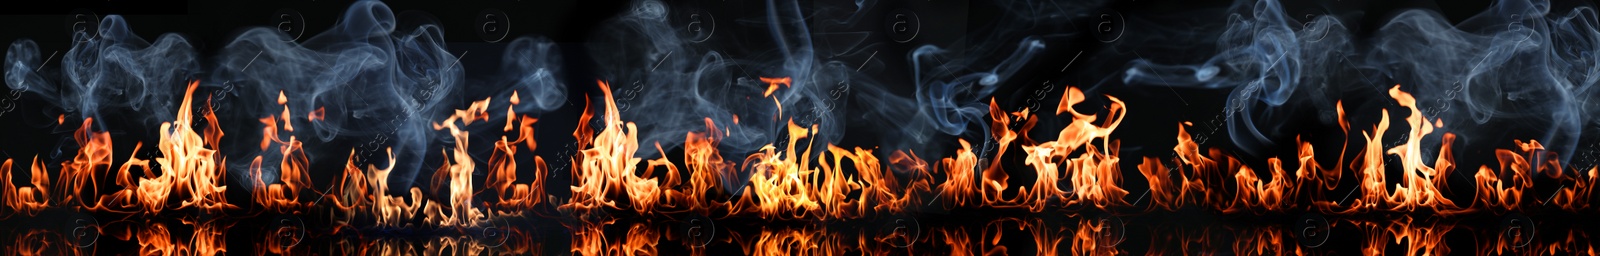 Image of Bright fire flames with smoke on black background. Banner design